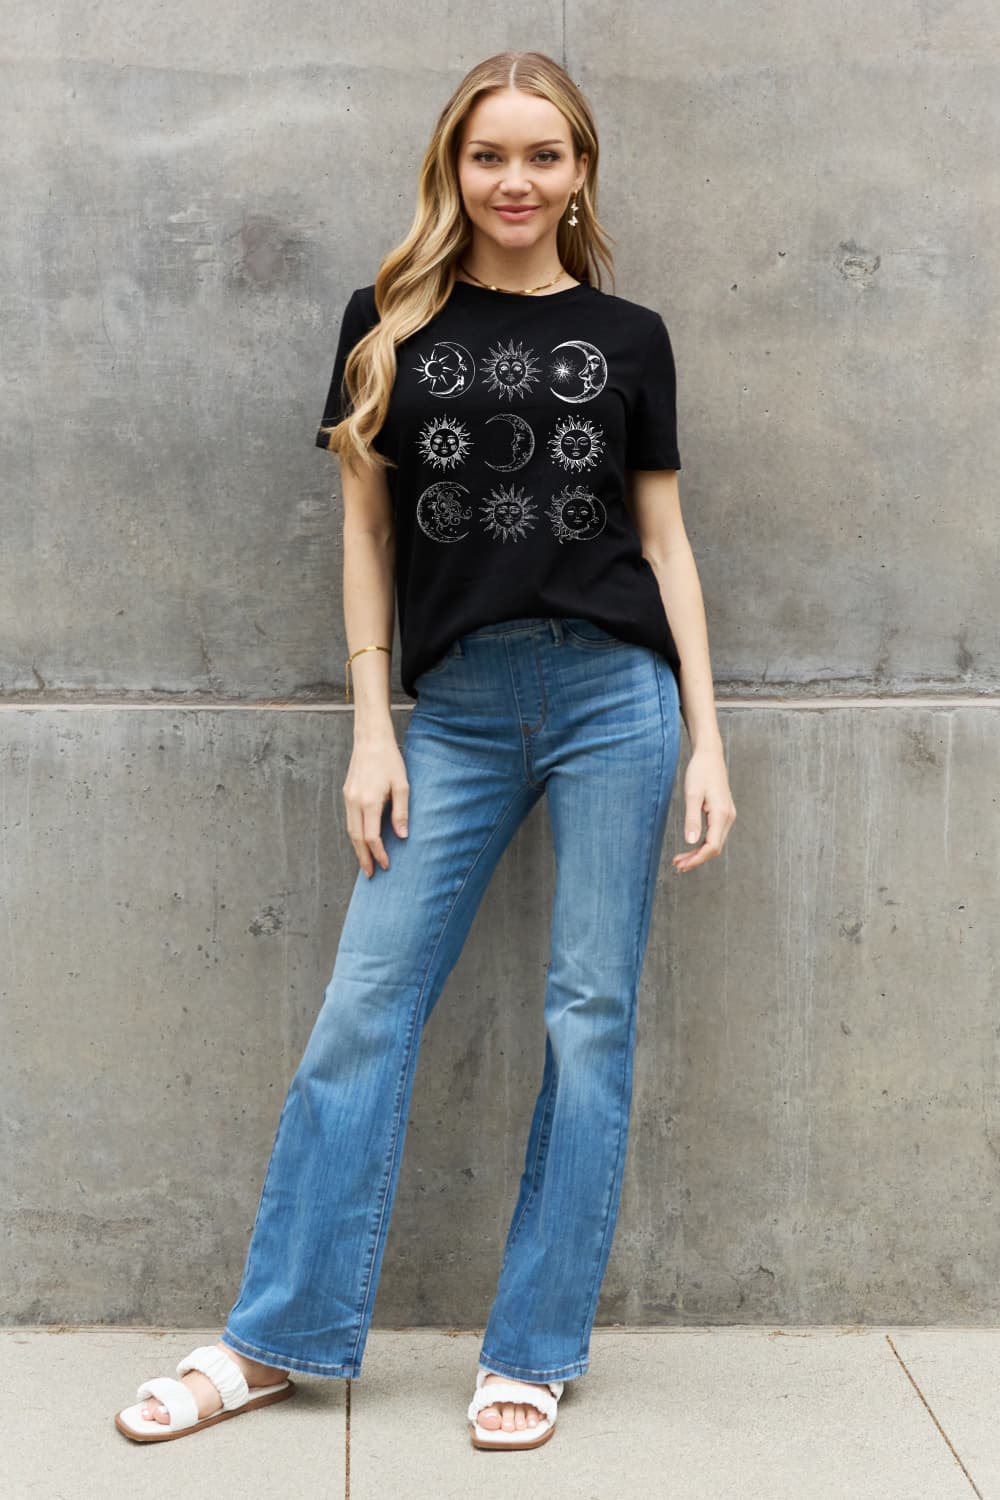 Simply Love Sun and Moon Graphic Cotton Tee